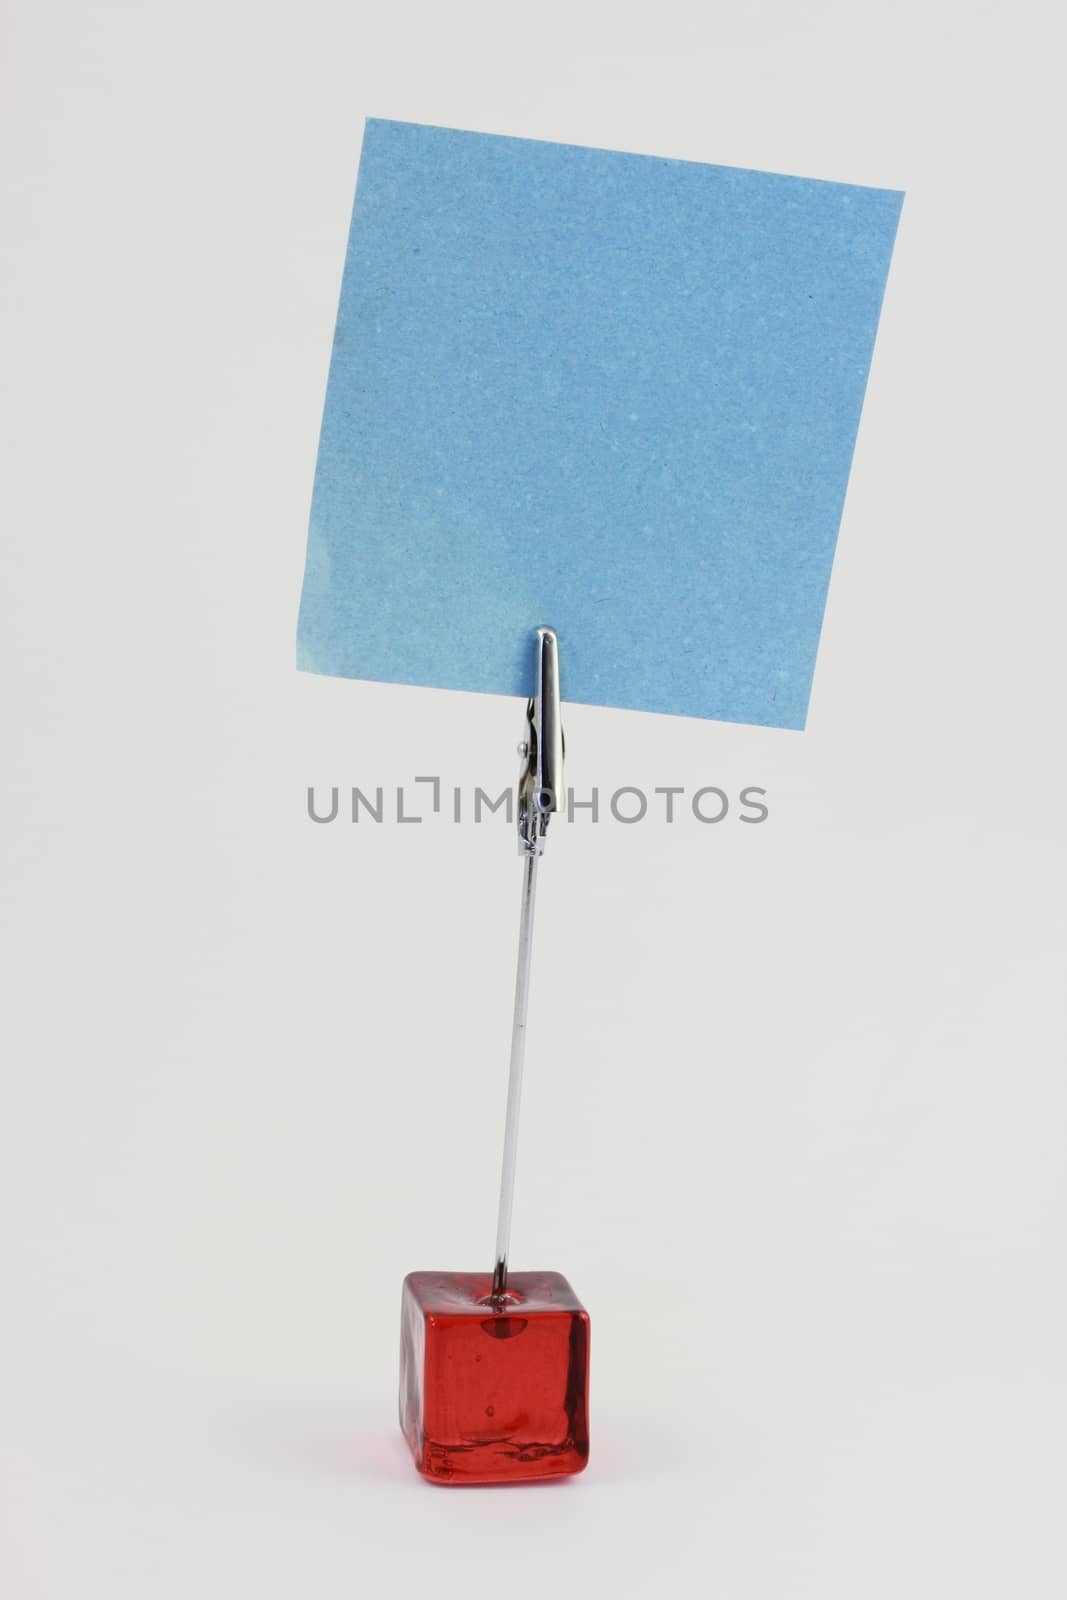 Red glass note-holder with alligator clip and blank blue note